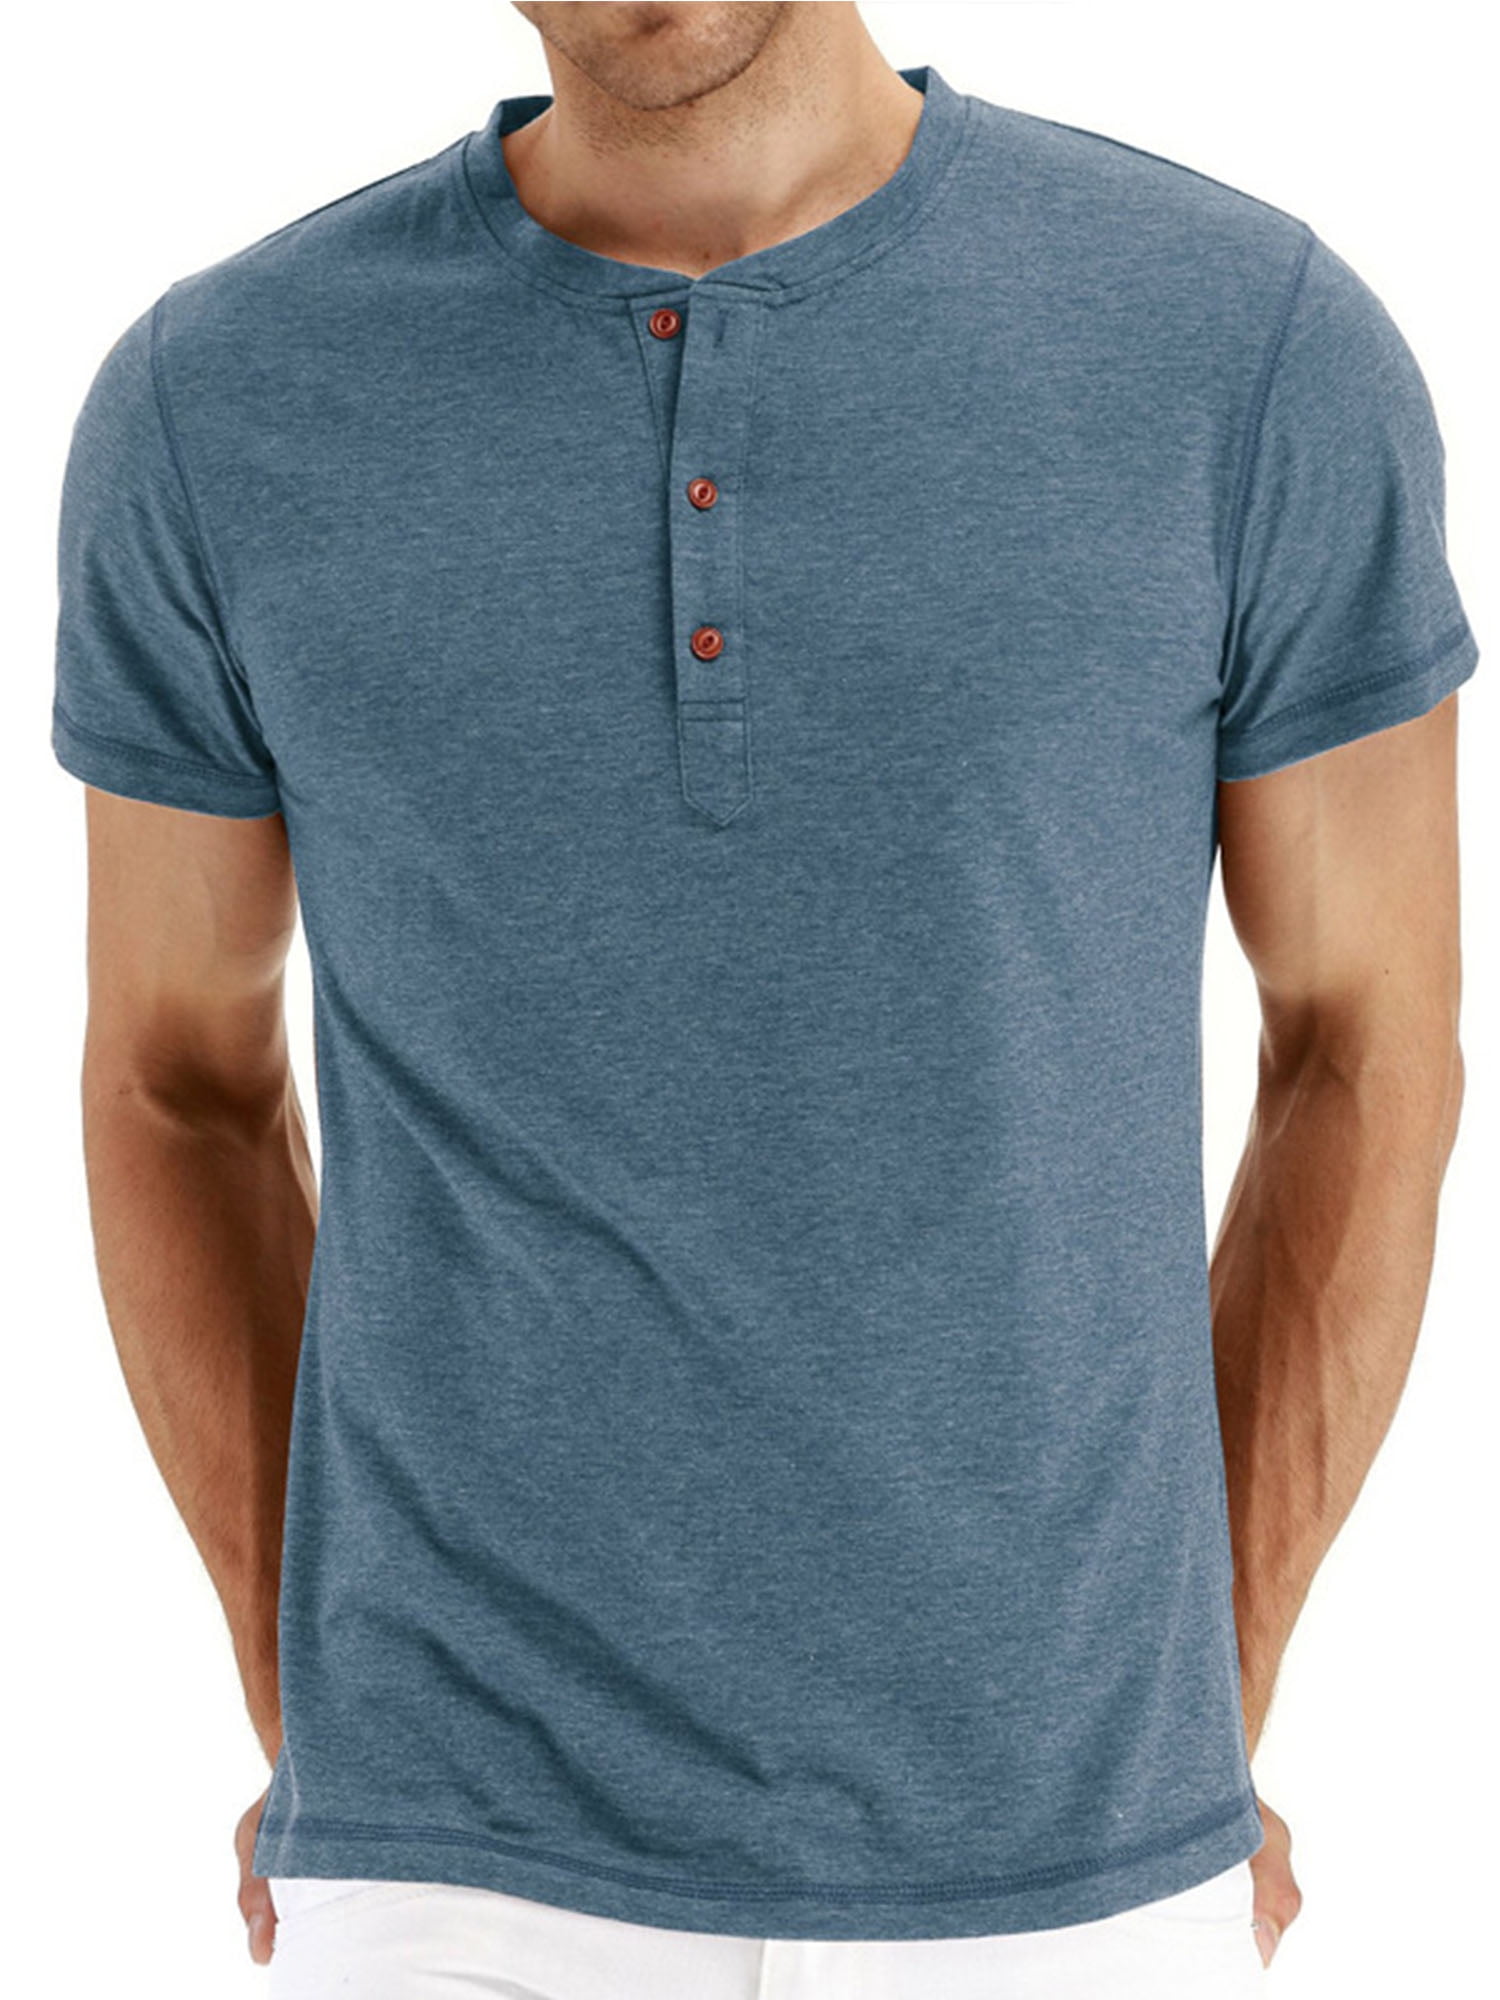 H2H Mens Casual Premium Slim Fit T-Shirts Henley Long & 3/4 Sleeve Summer Clothes 